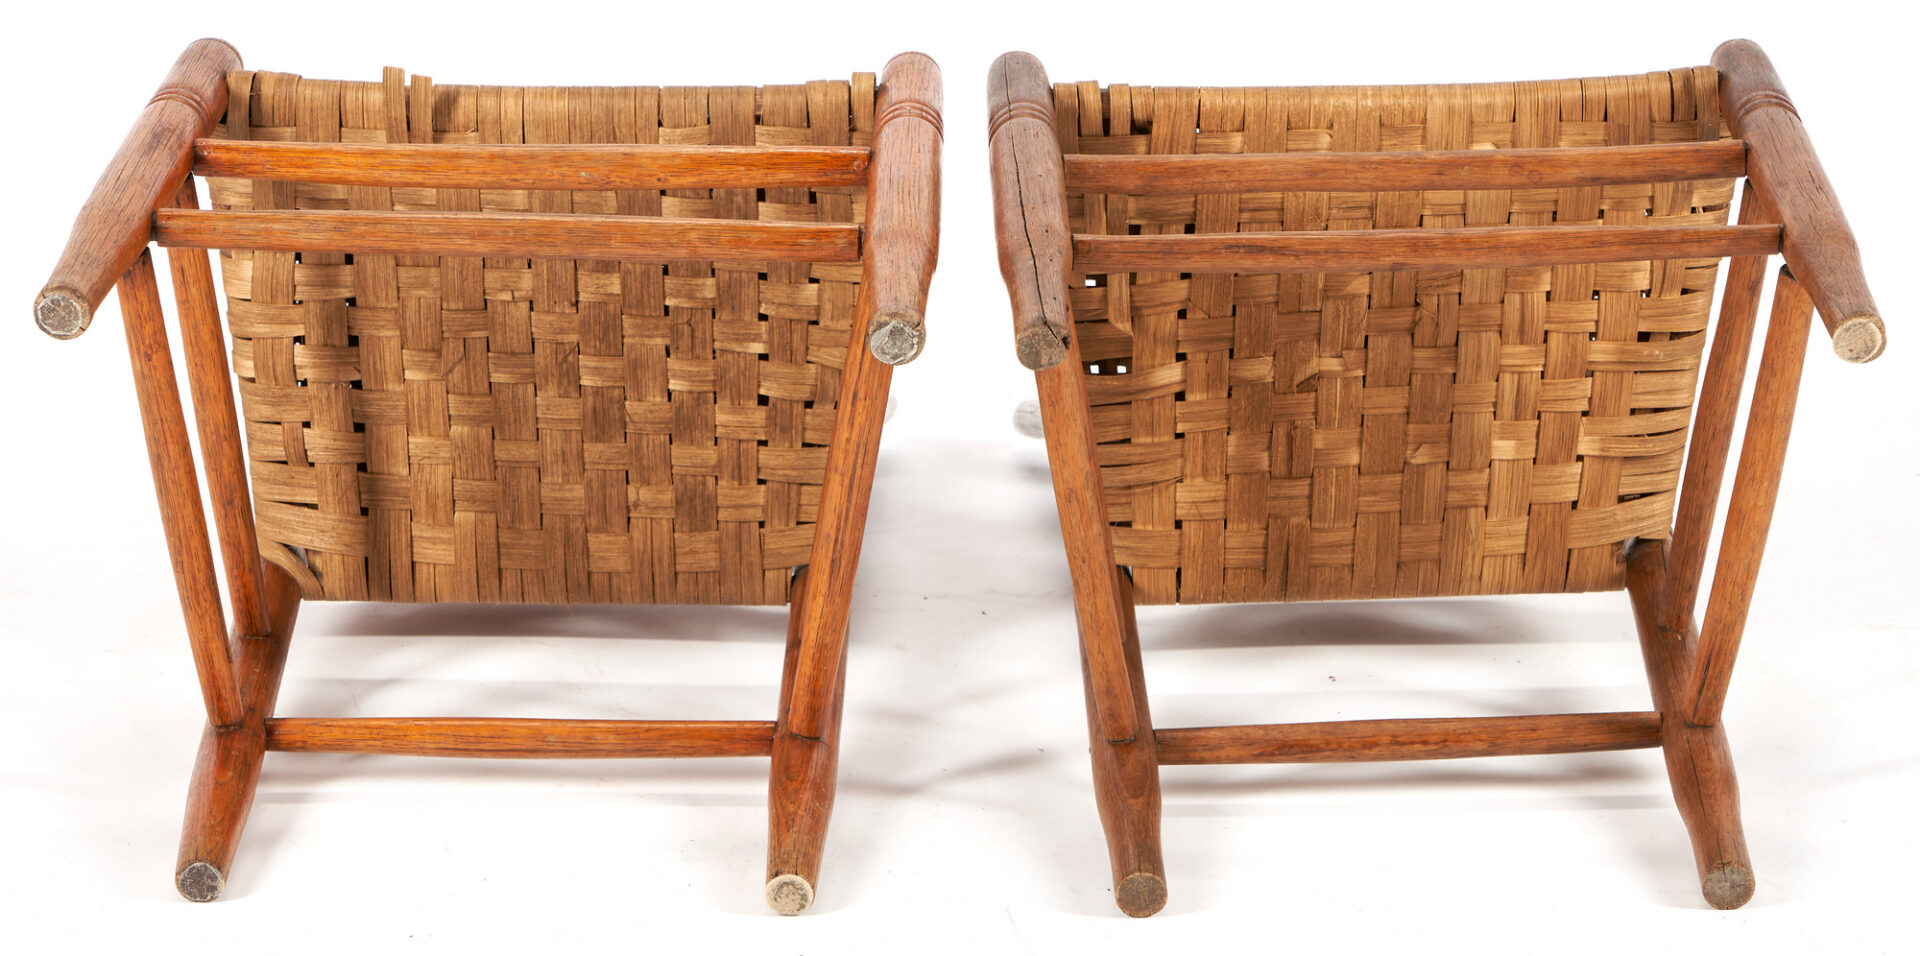 Lot 185: 5 Middle TN Chairs, Marked and Exhibited